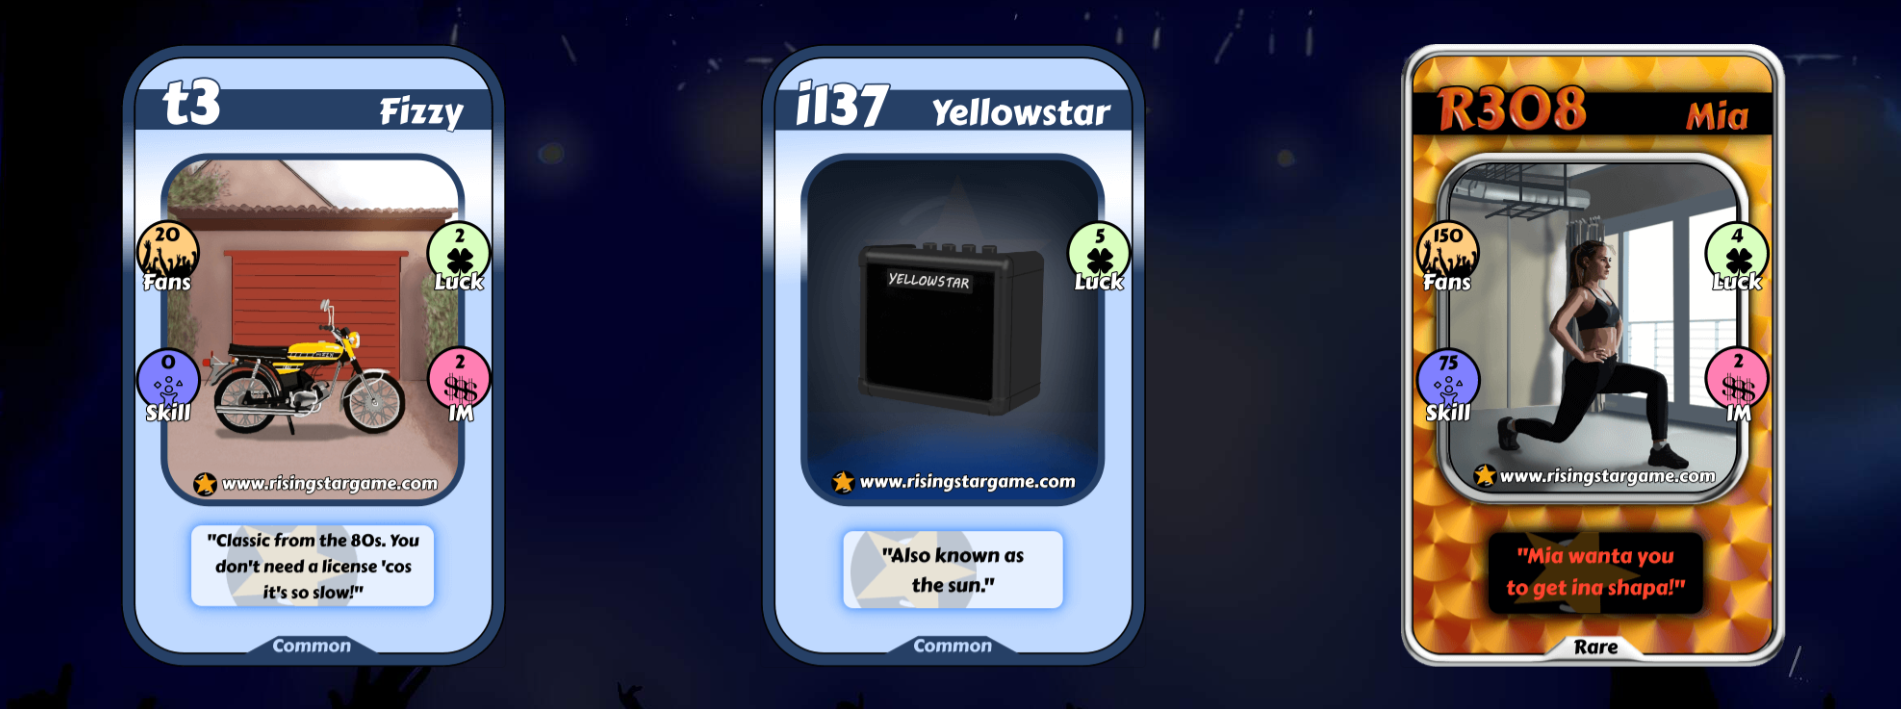 openingmypack.png